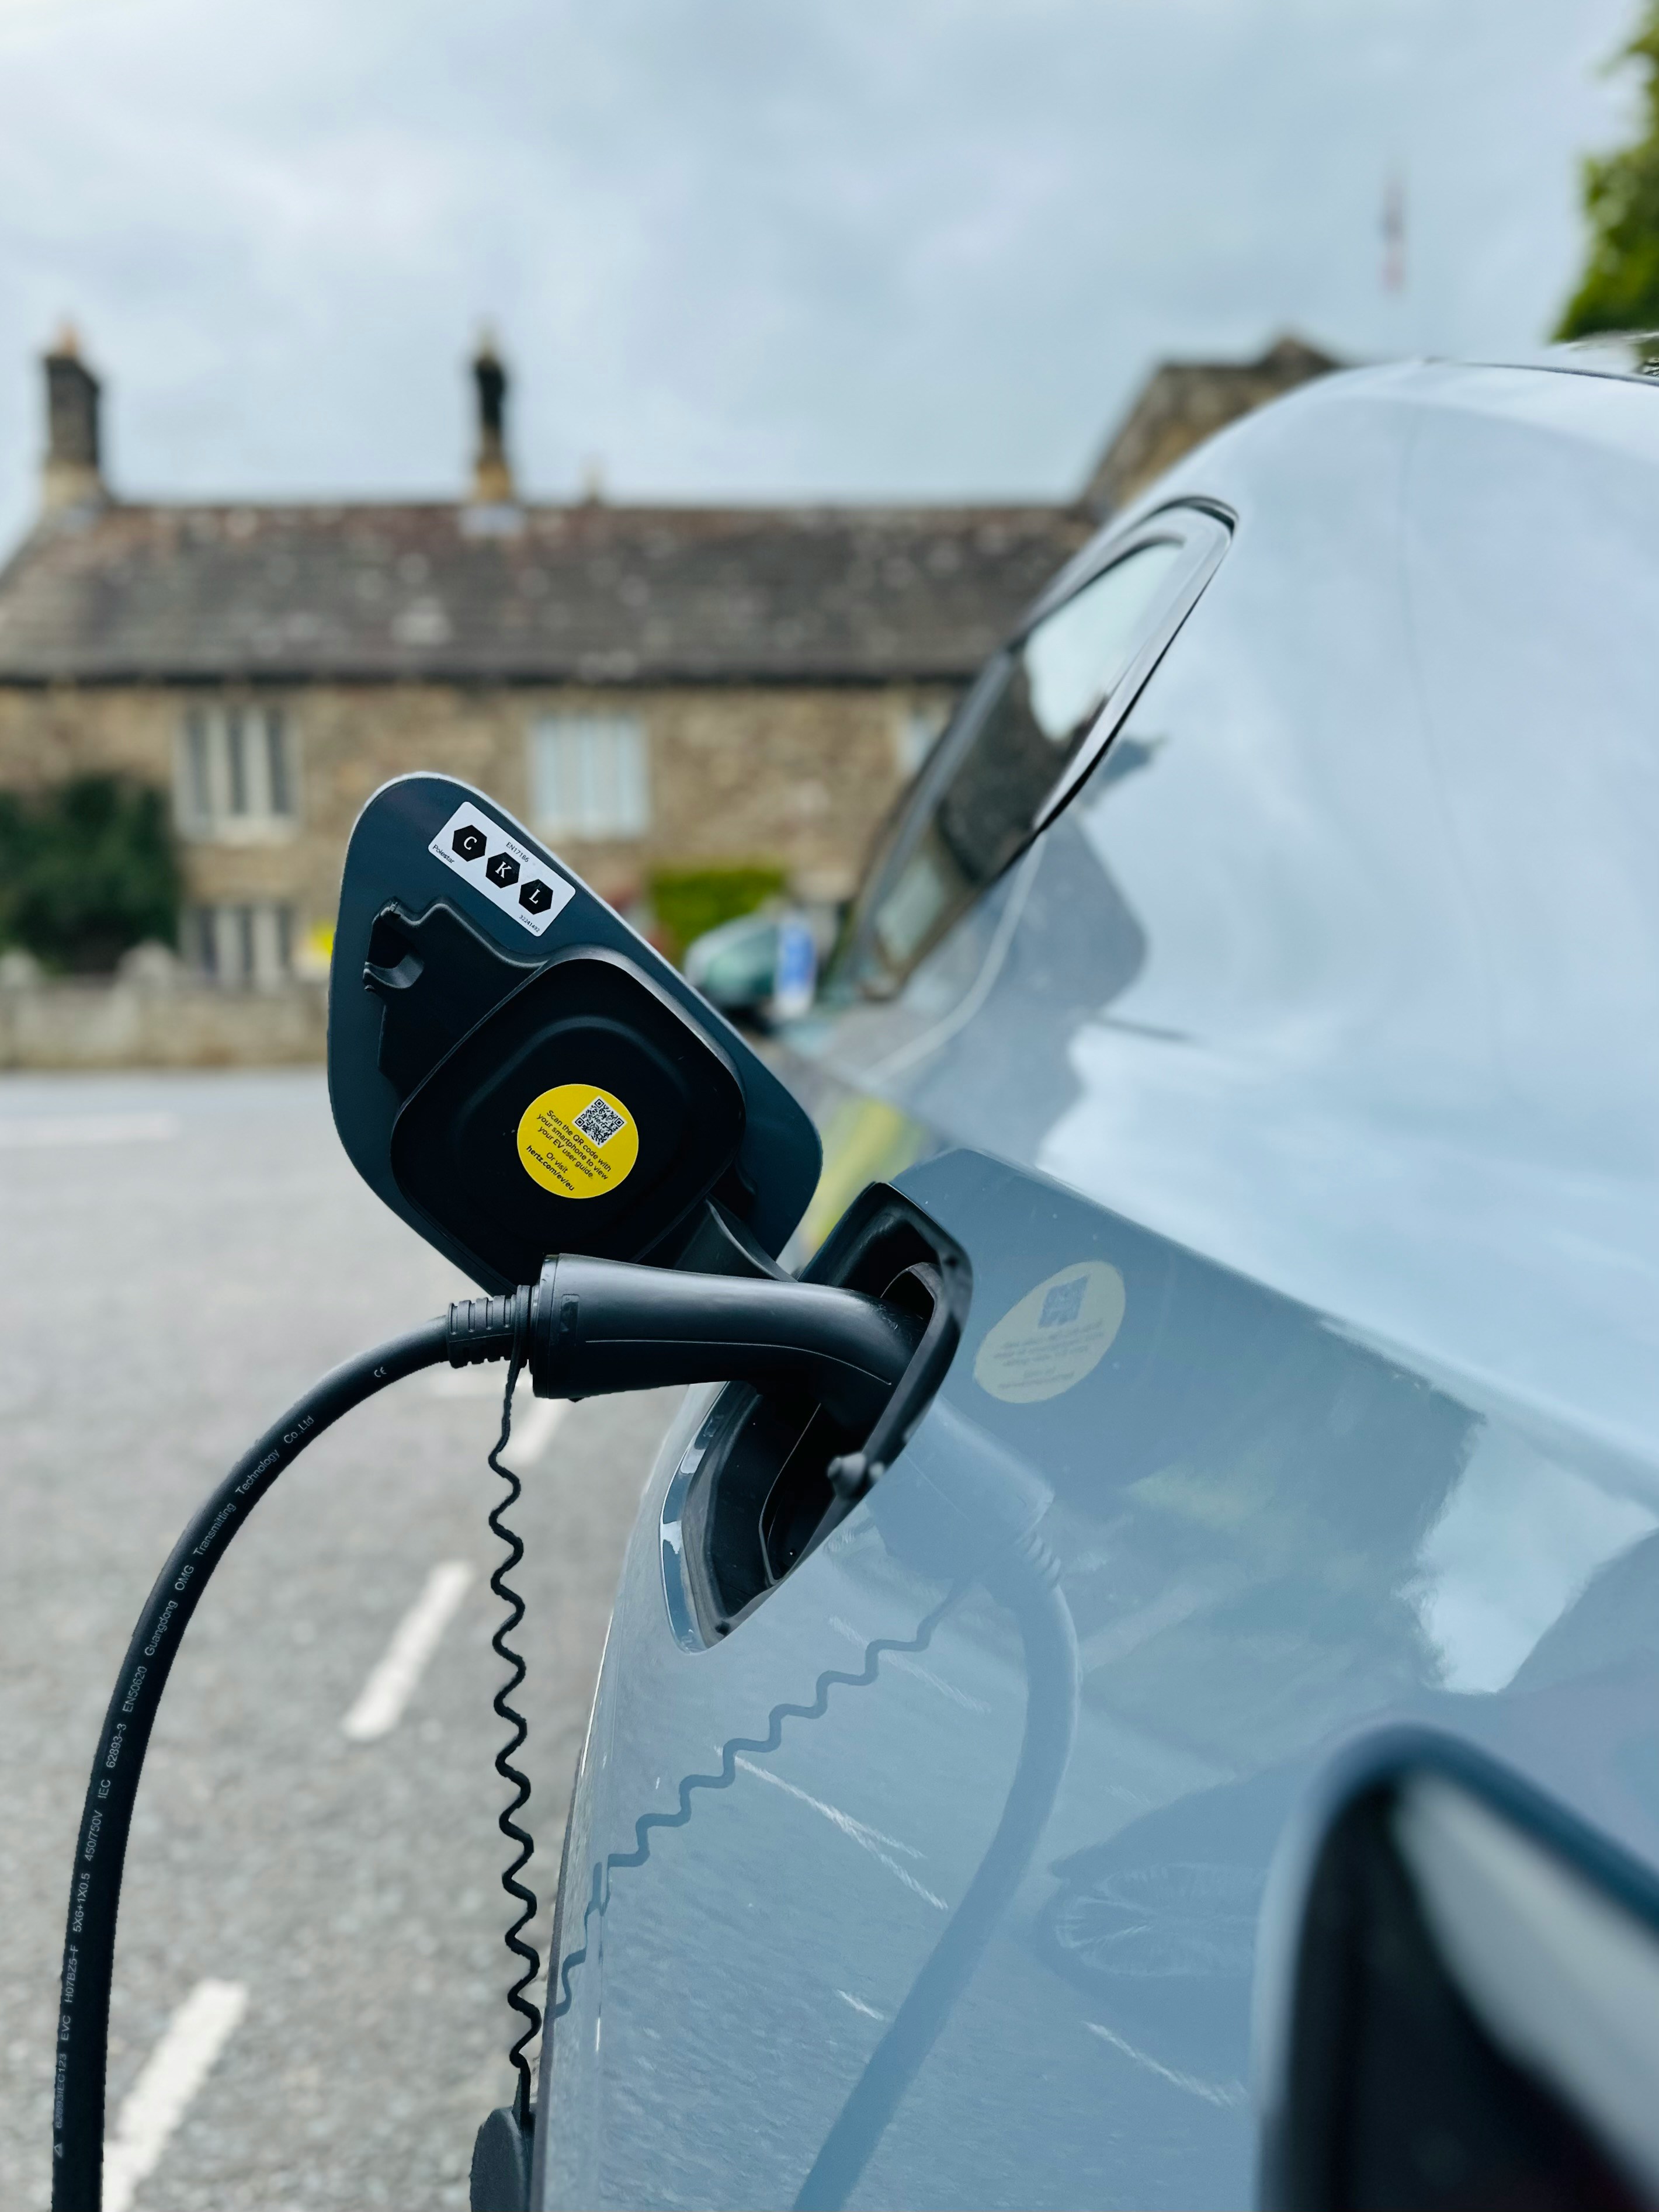 Innovative EV charging technology for your home from 3D Energy UK